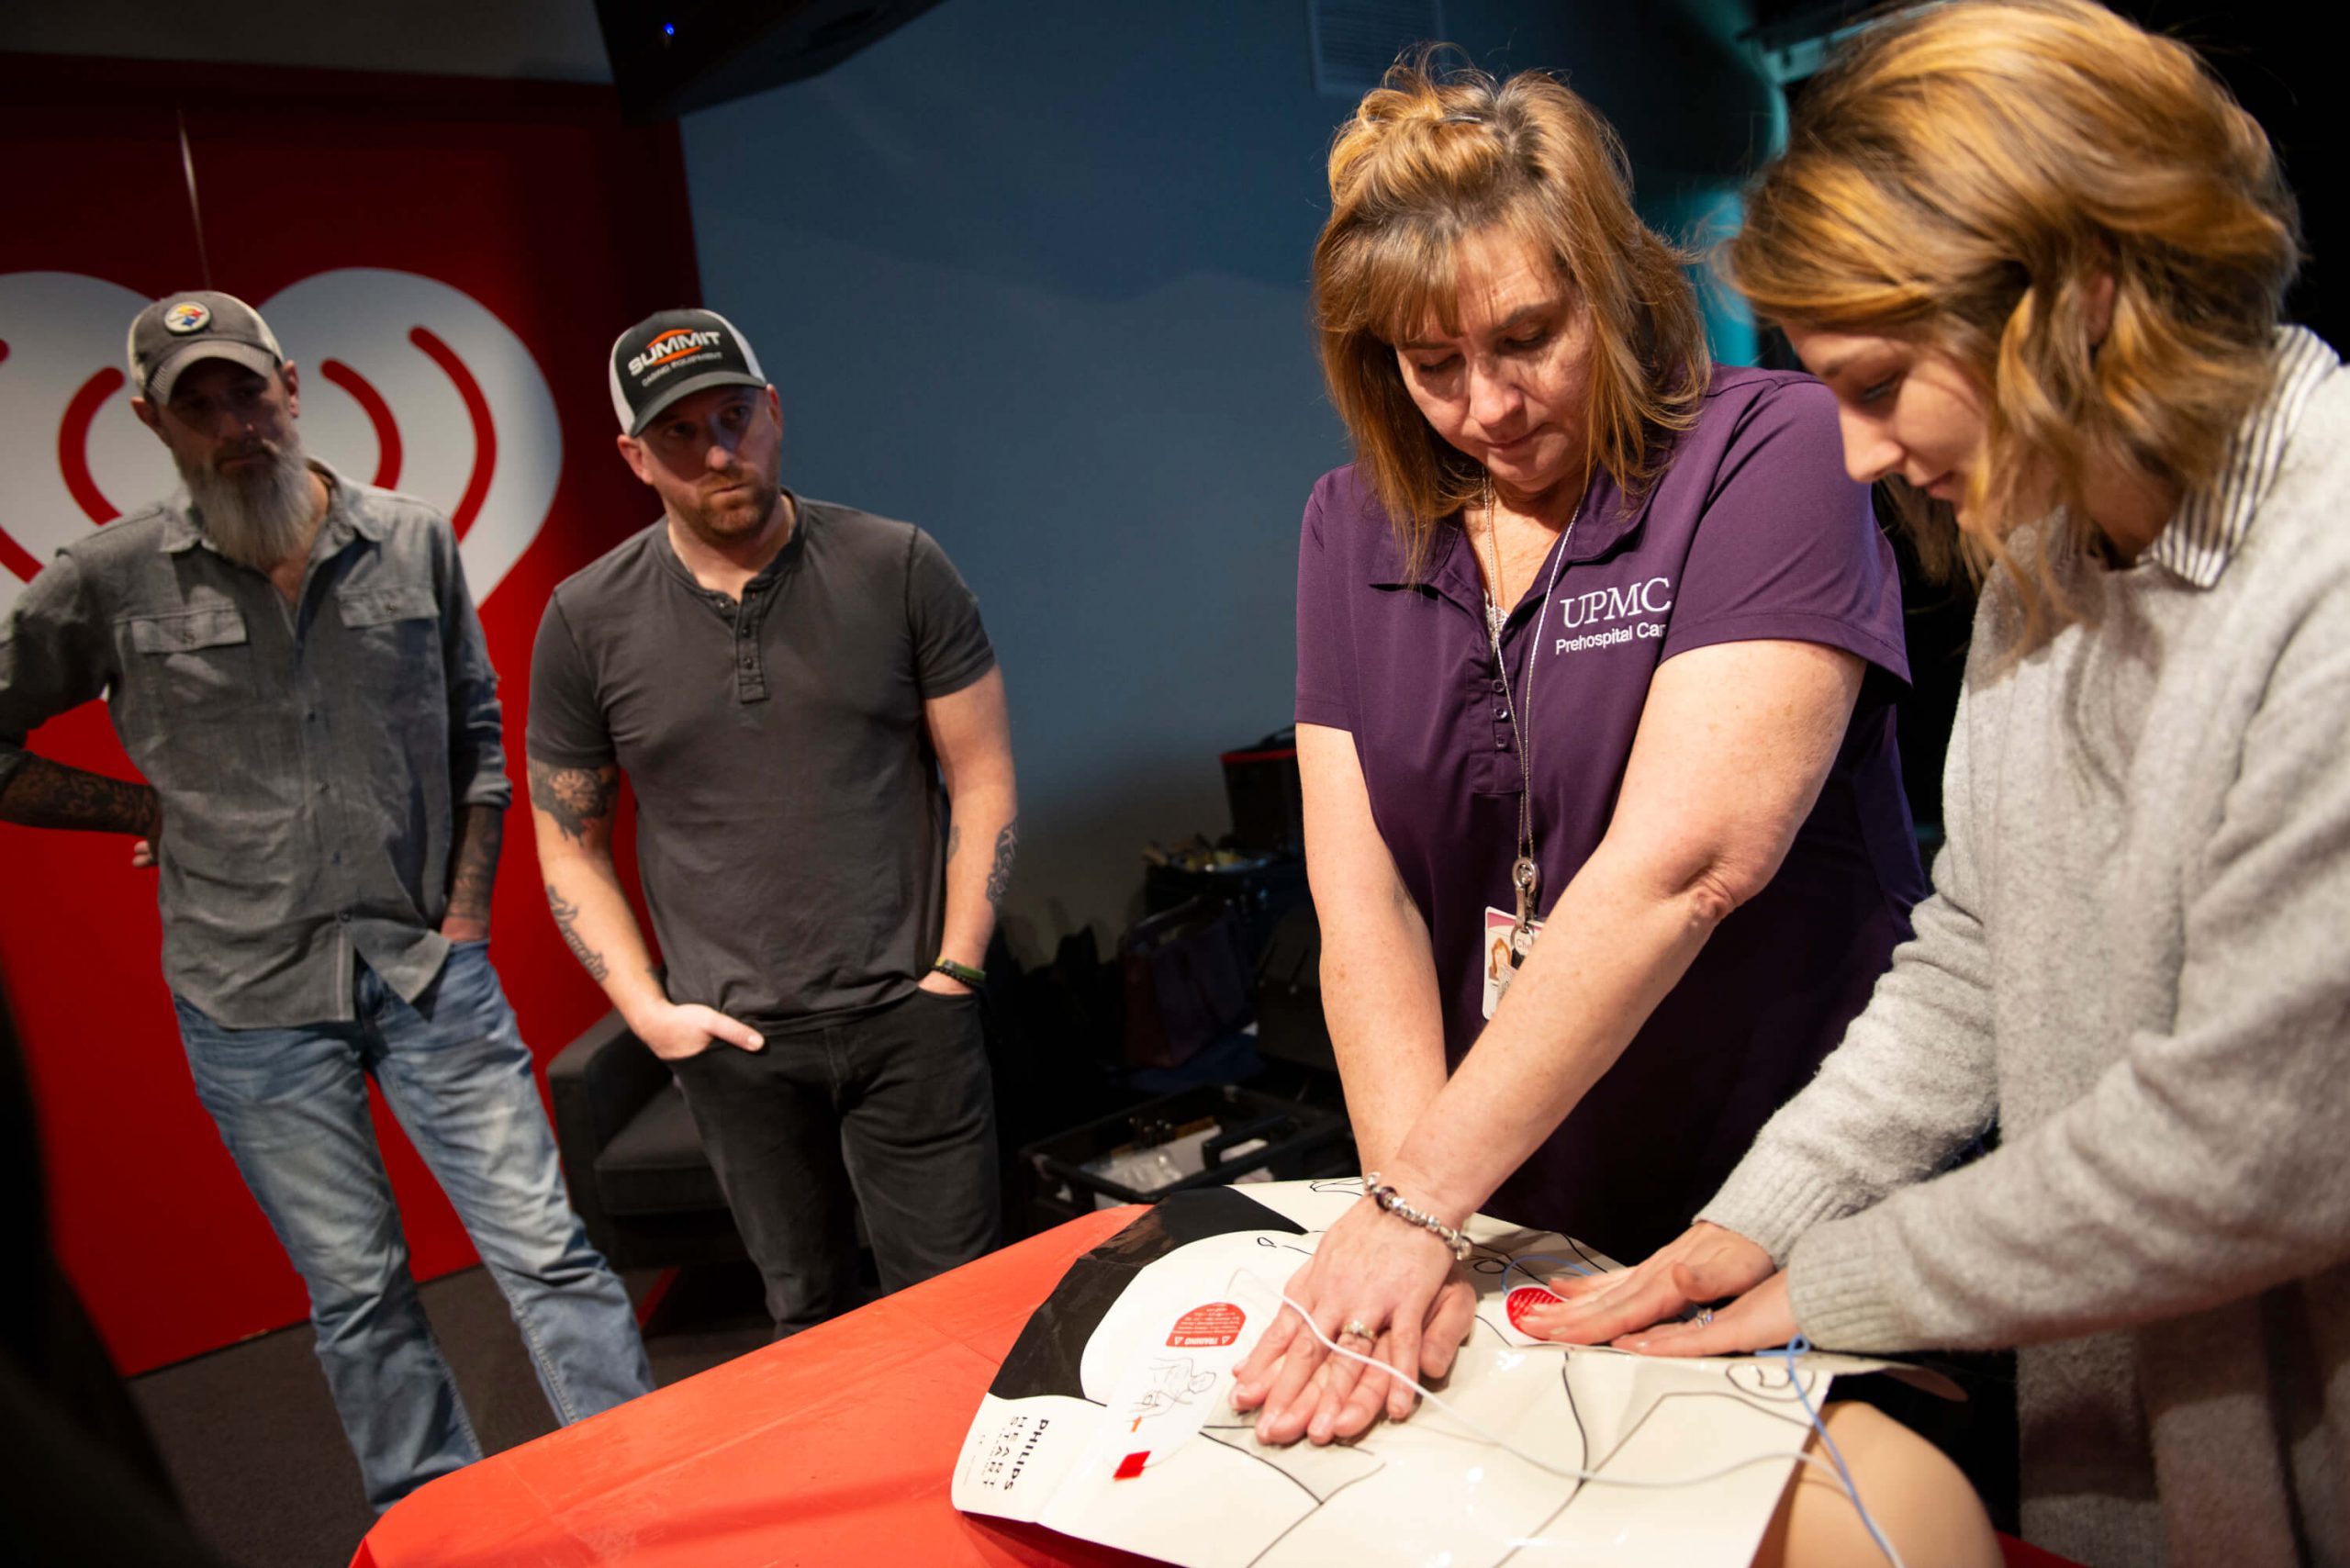 Woman teaching how to give CPR on a dummy at a iHeartRadio event.